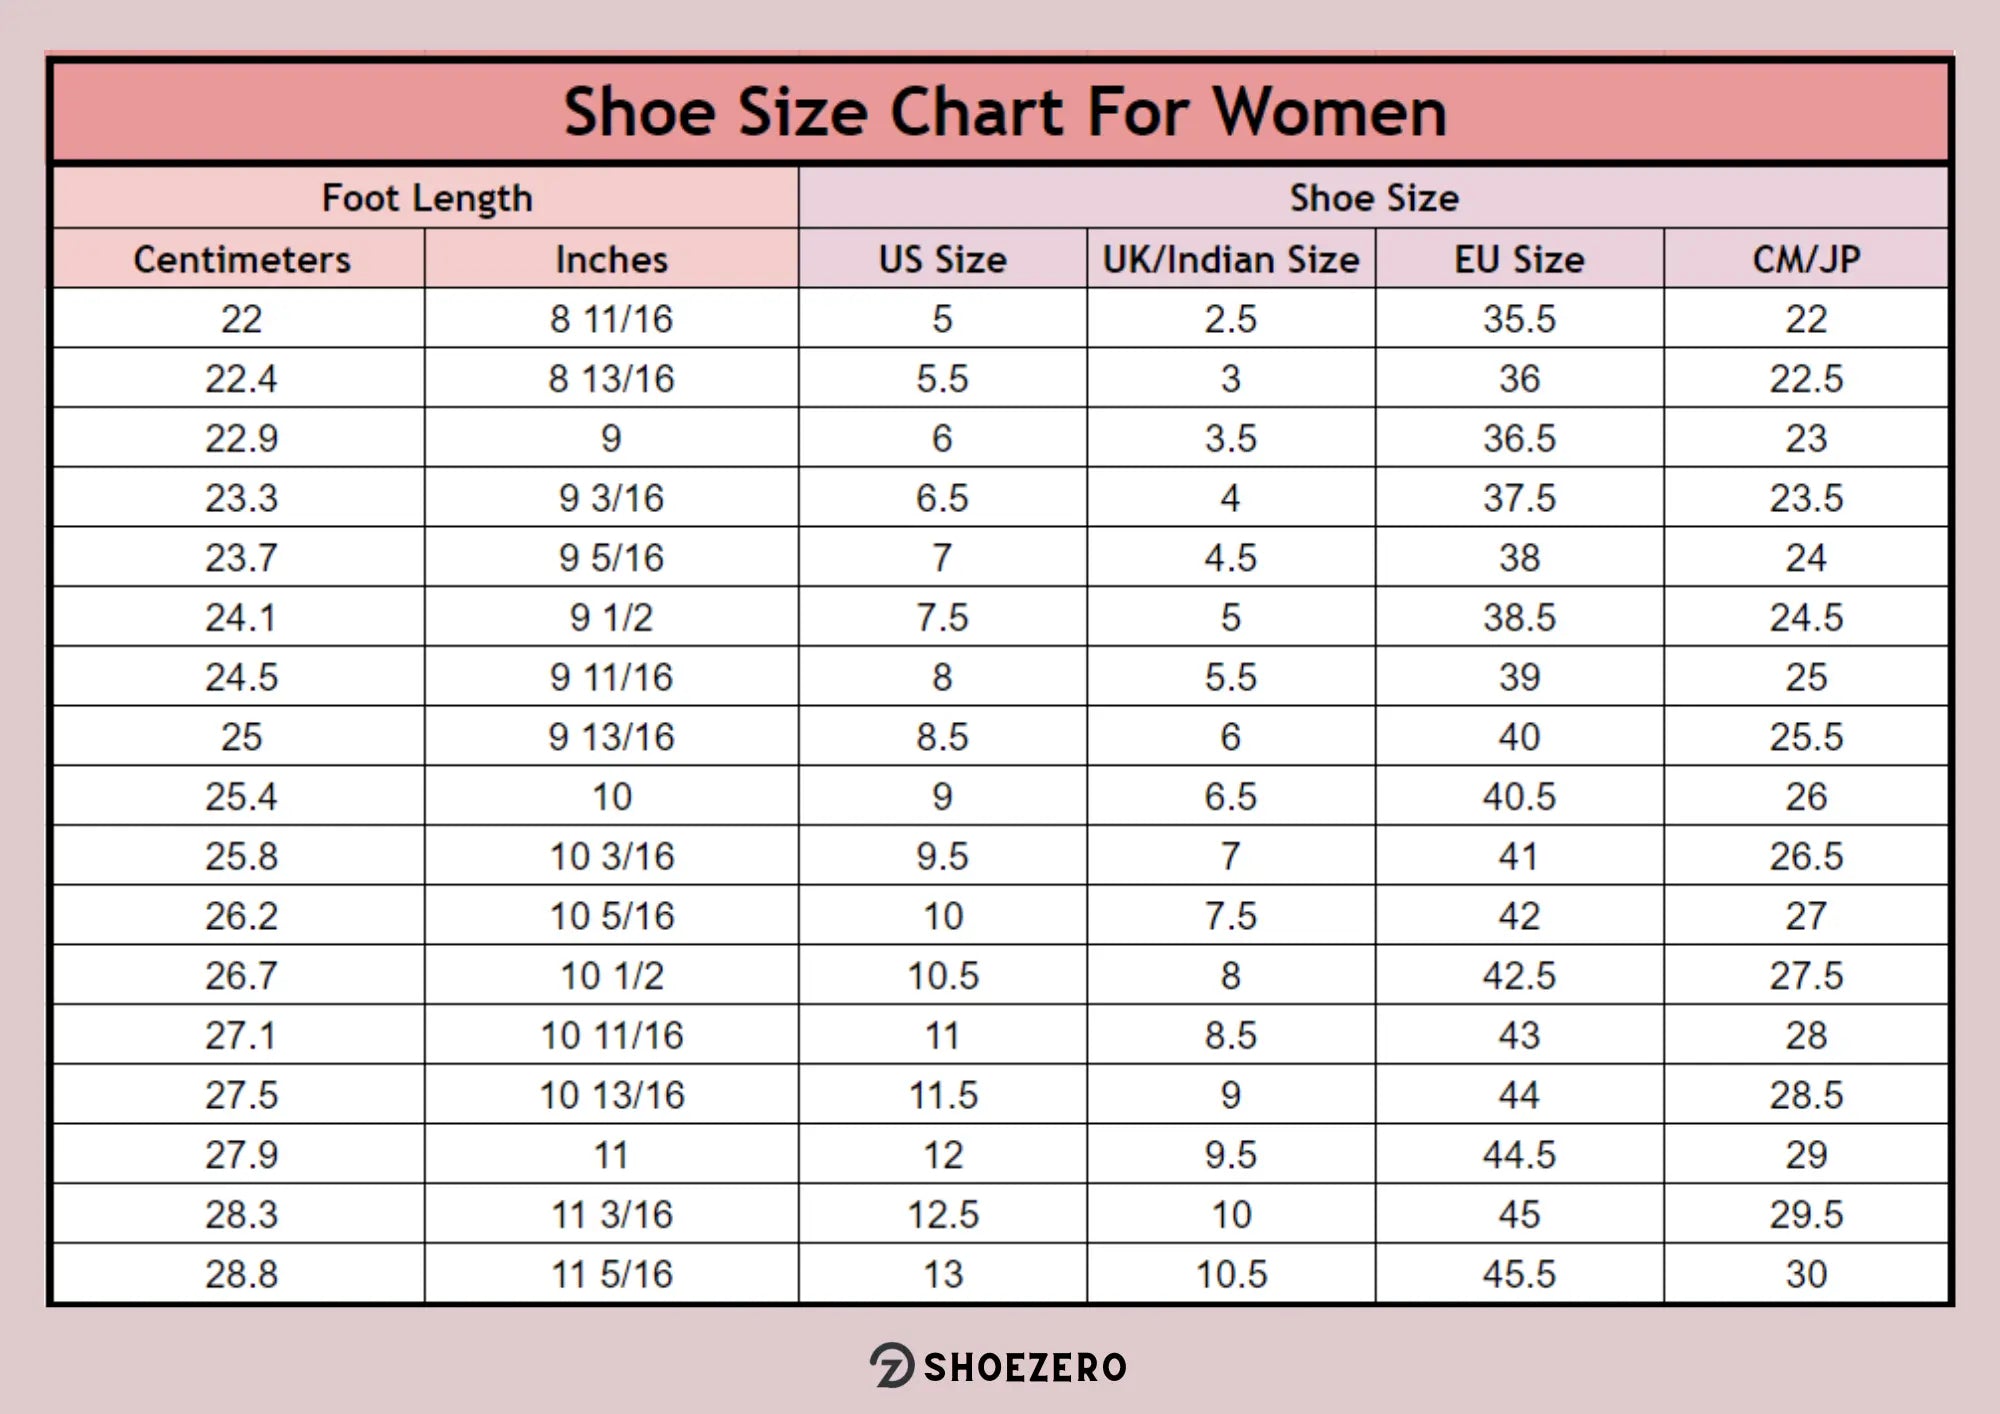 Shoe Sizing Guide: How To Measure Your Shoe Size & Width